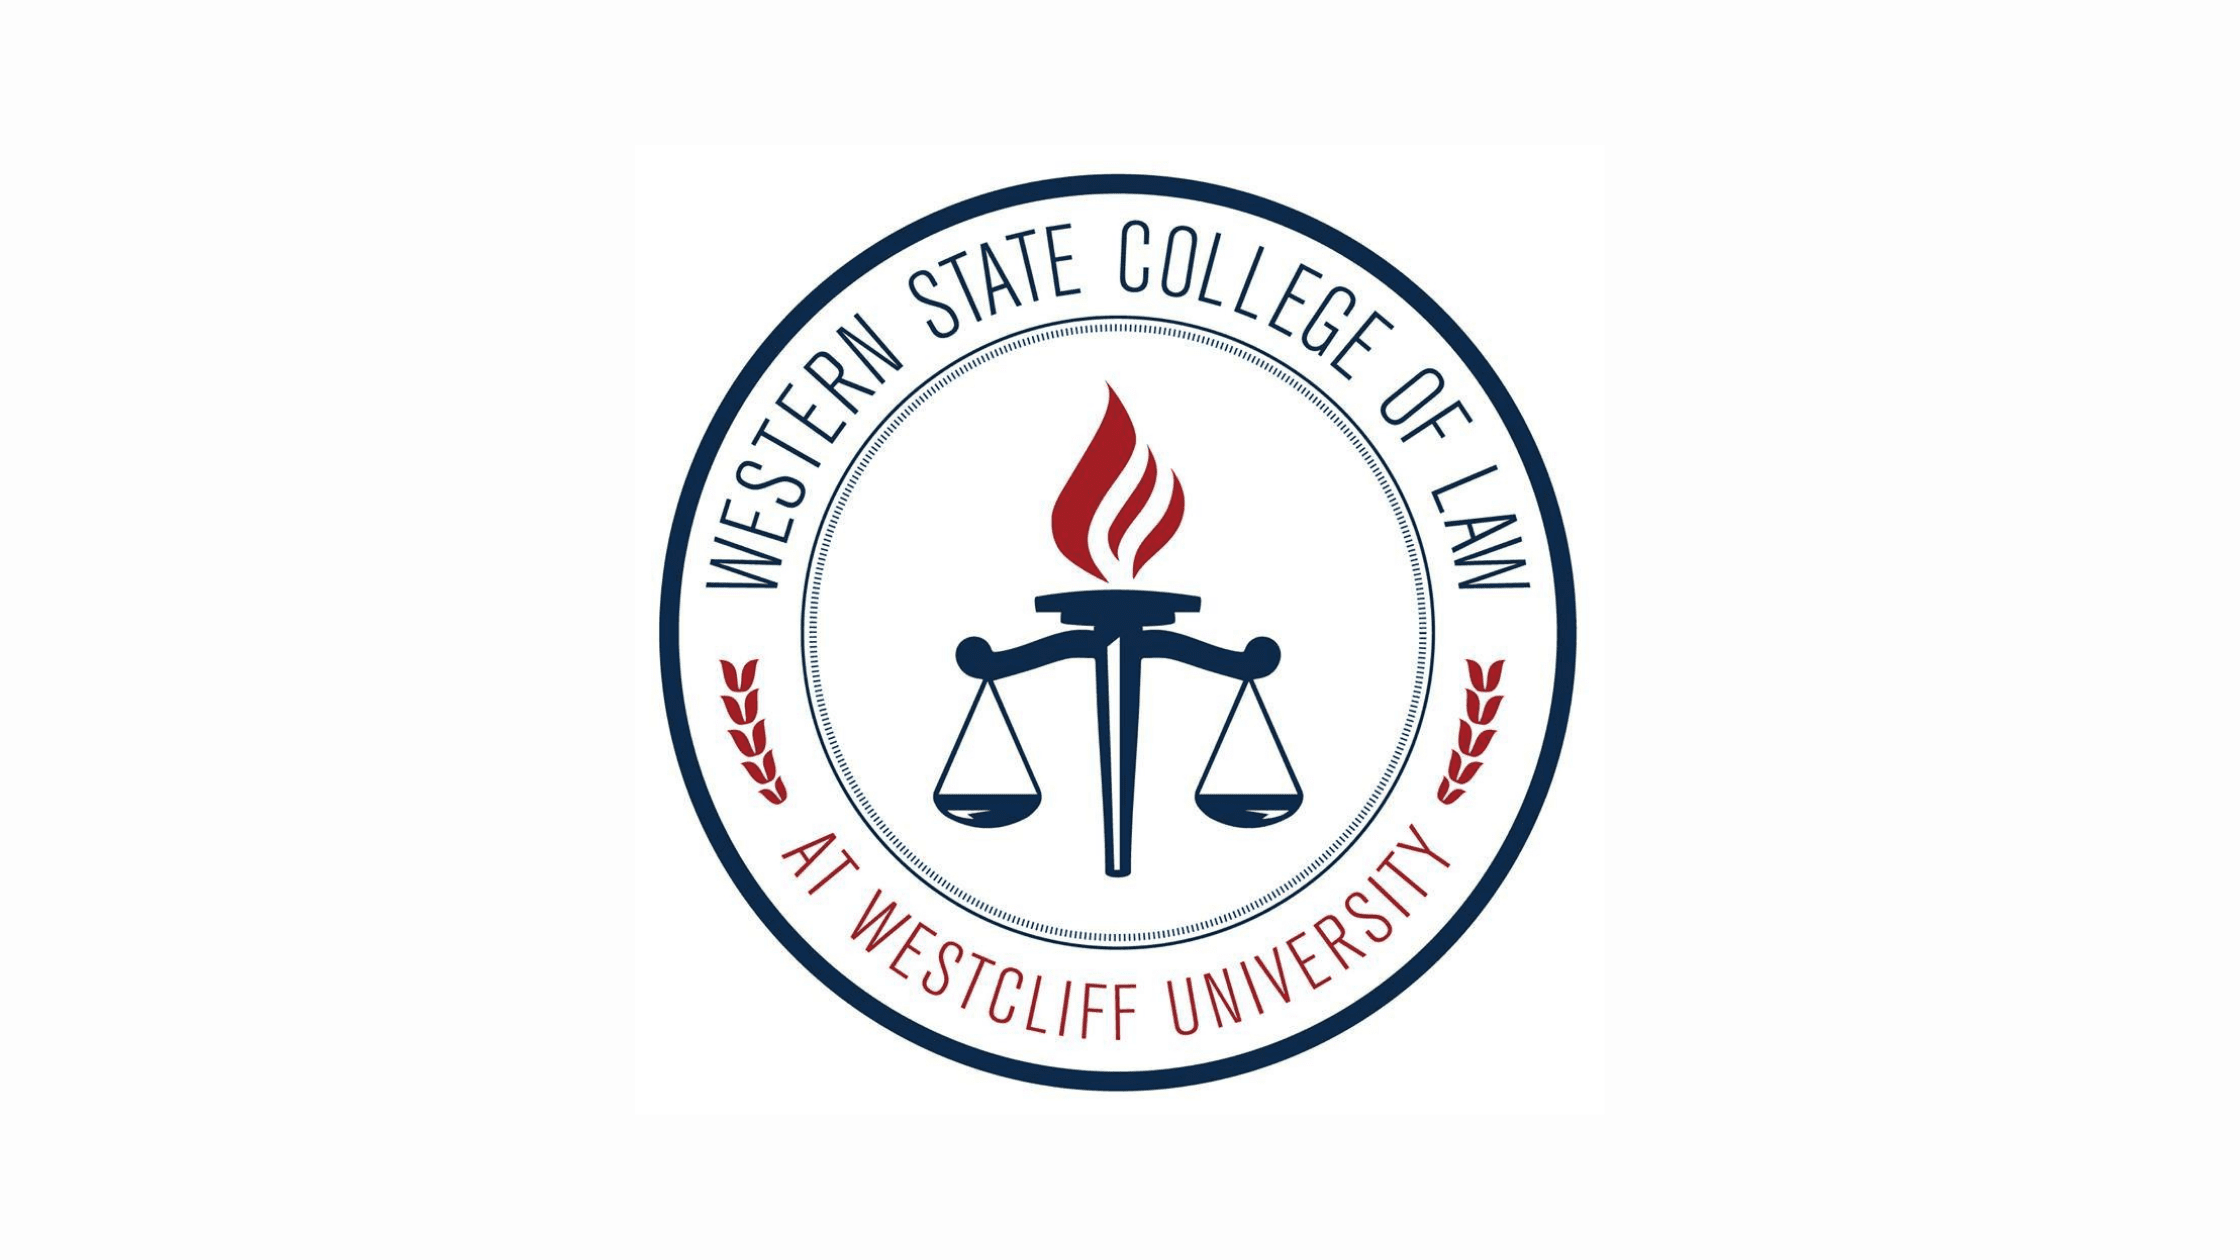 Westcliff University Finalizes Acquisition of Western State College of Law